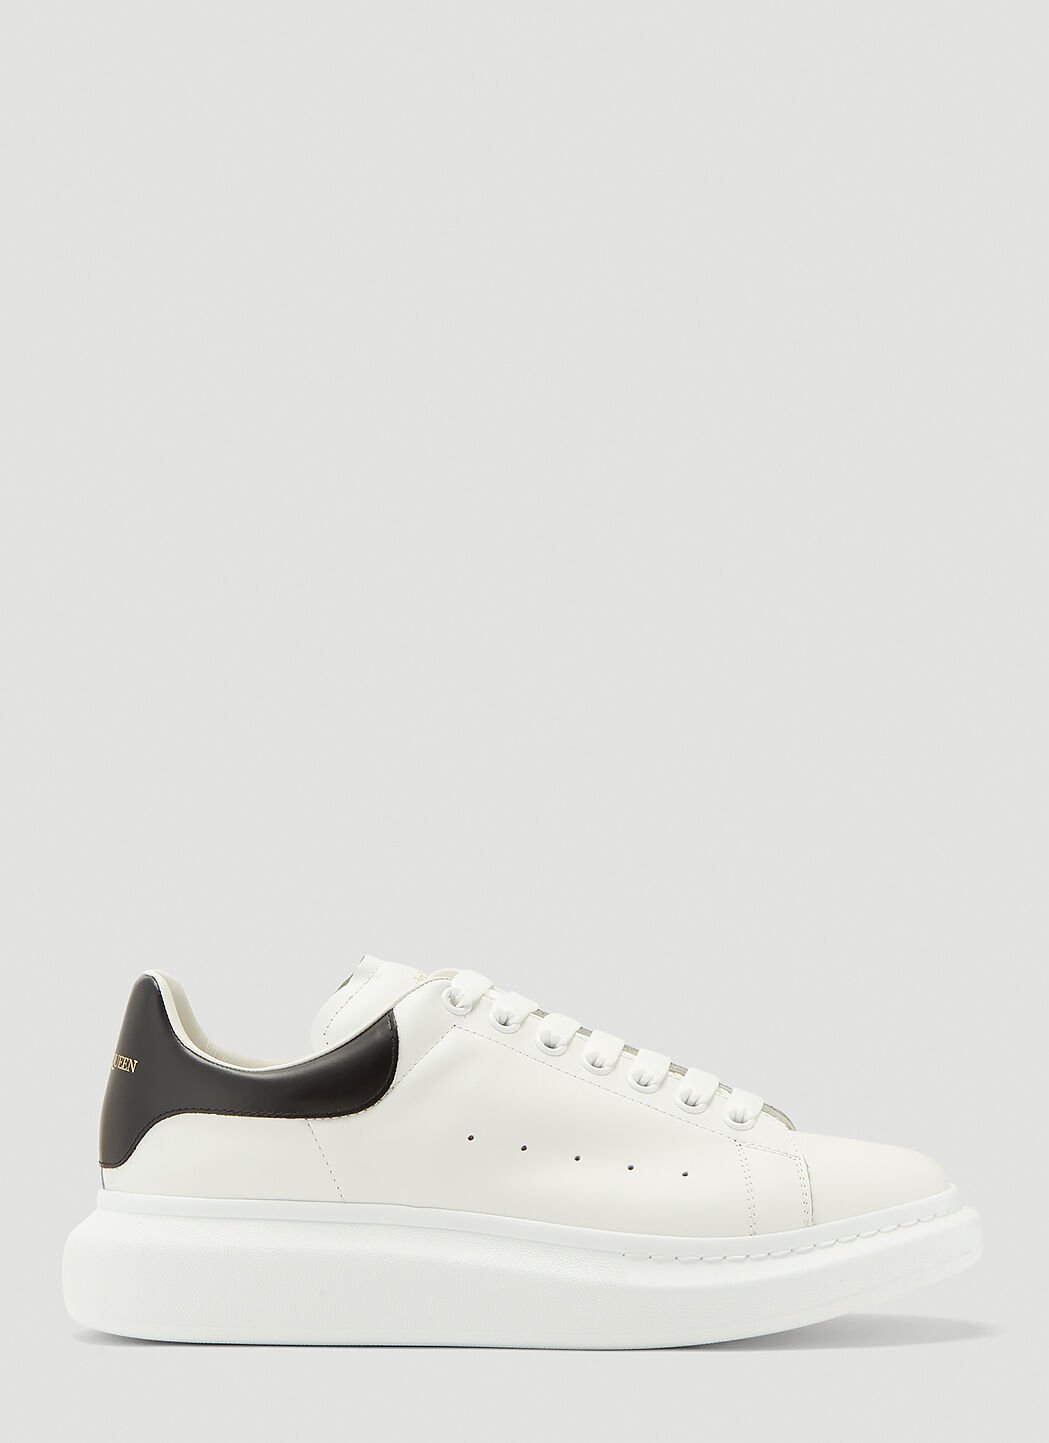 Gucci Leather Sneakers Beige guc0345002